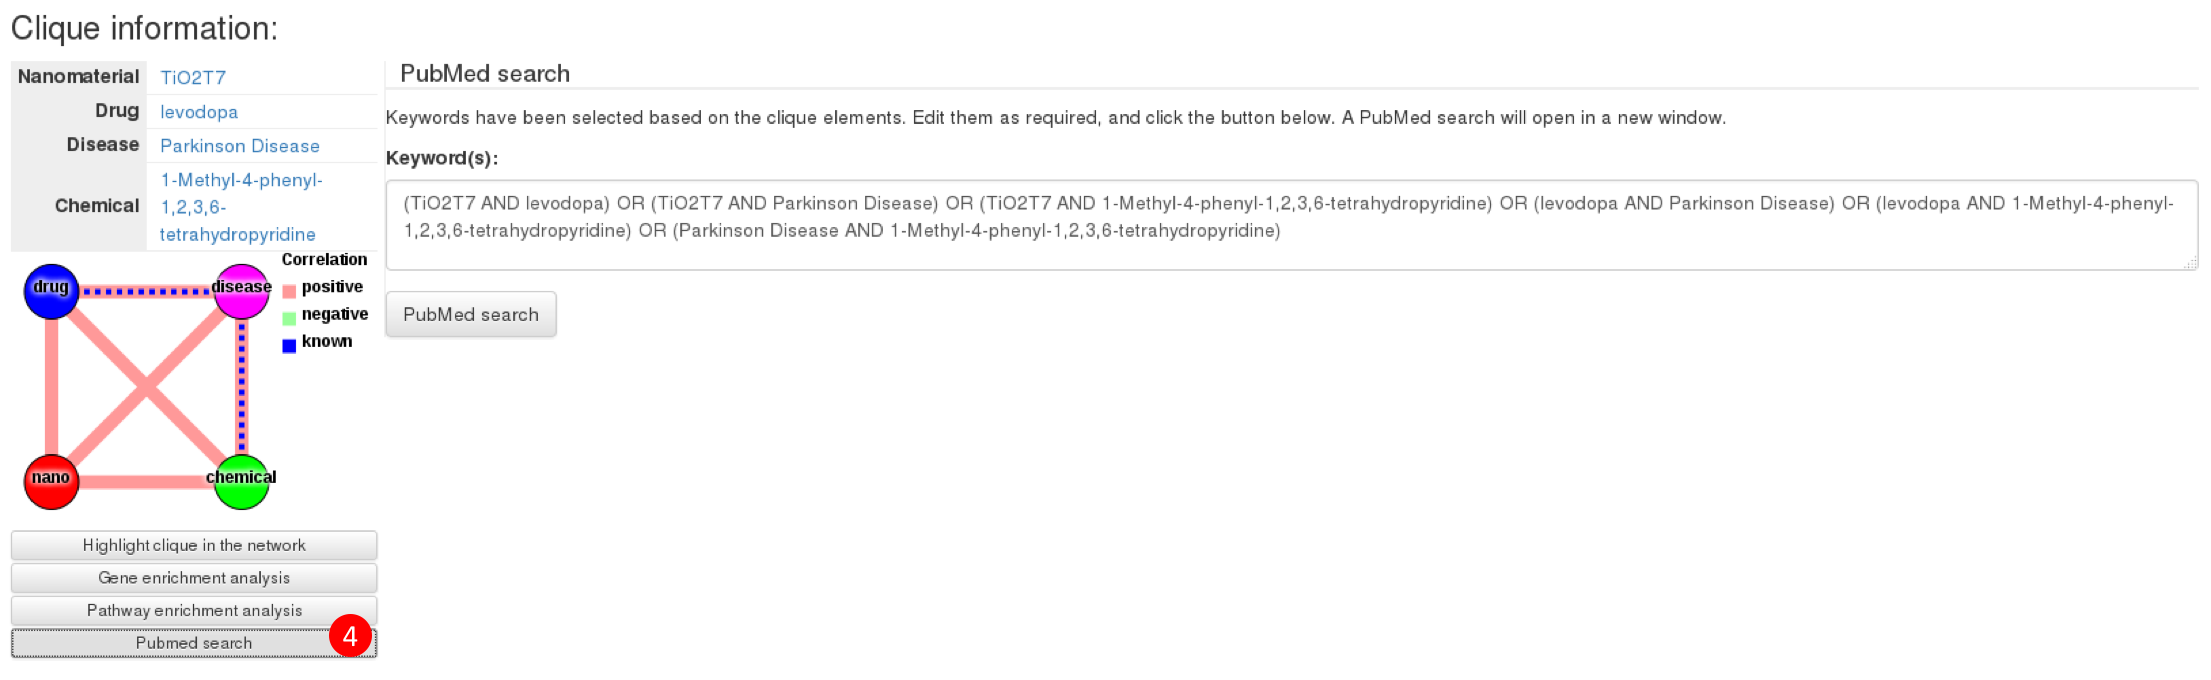 PubMed query interface